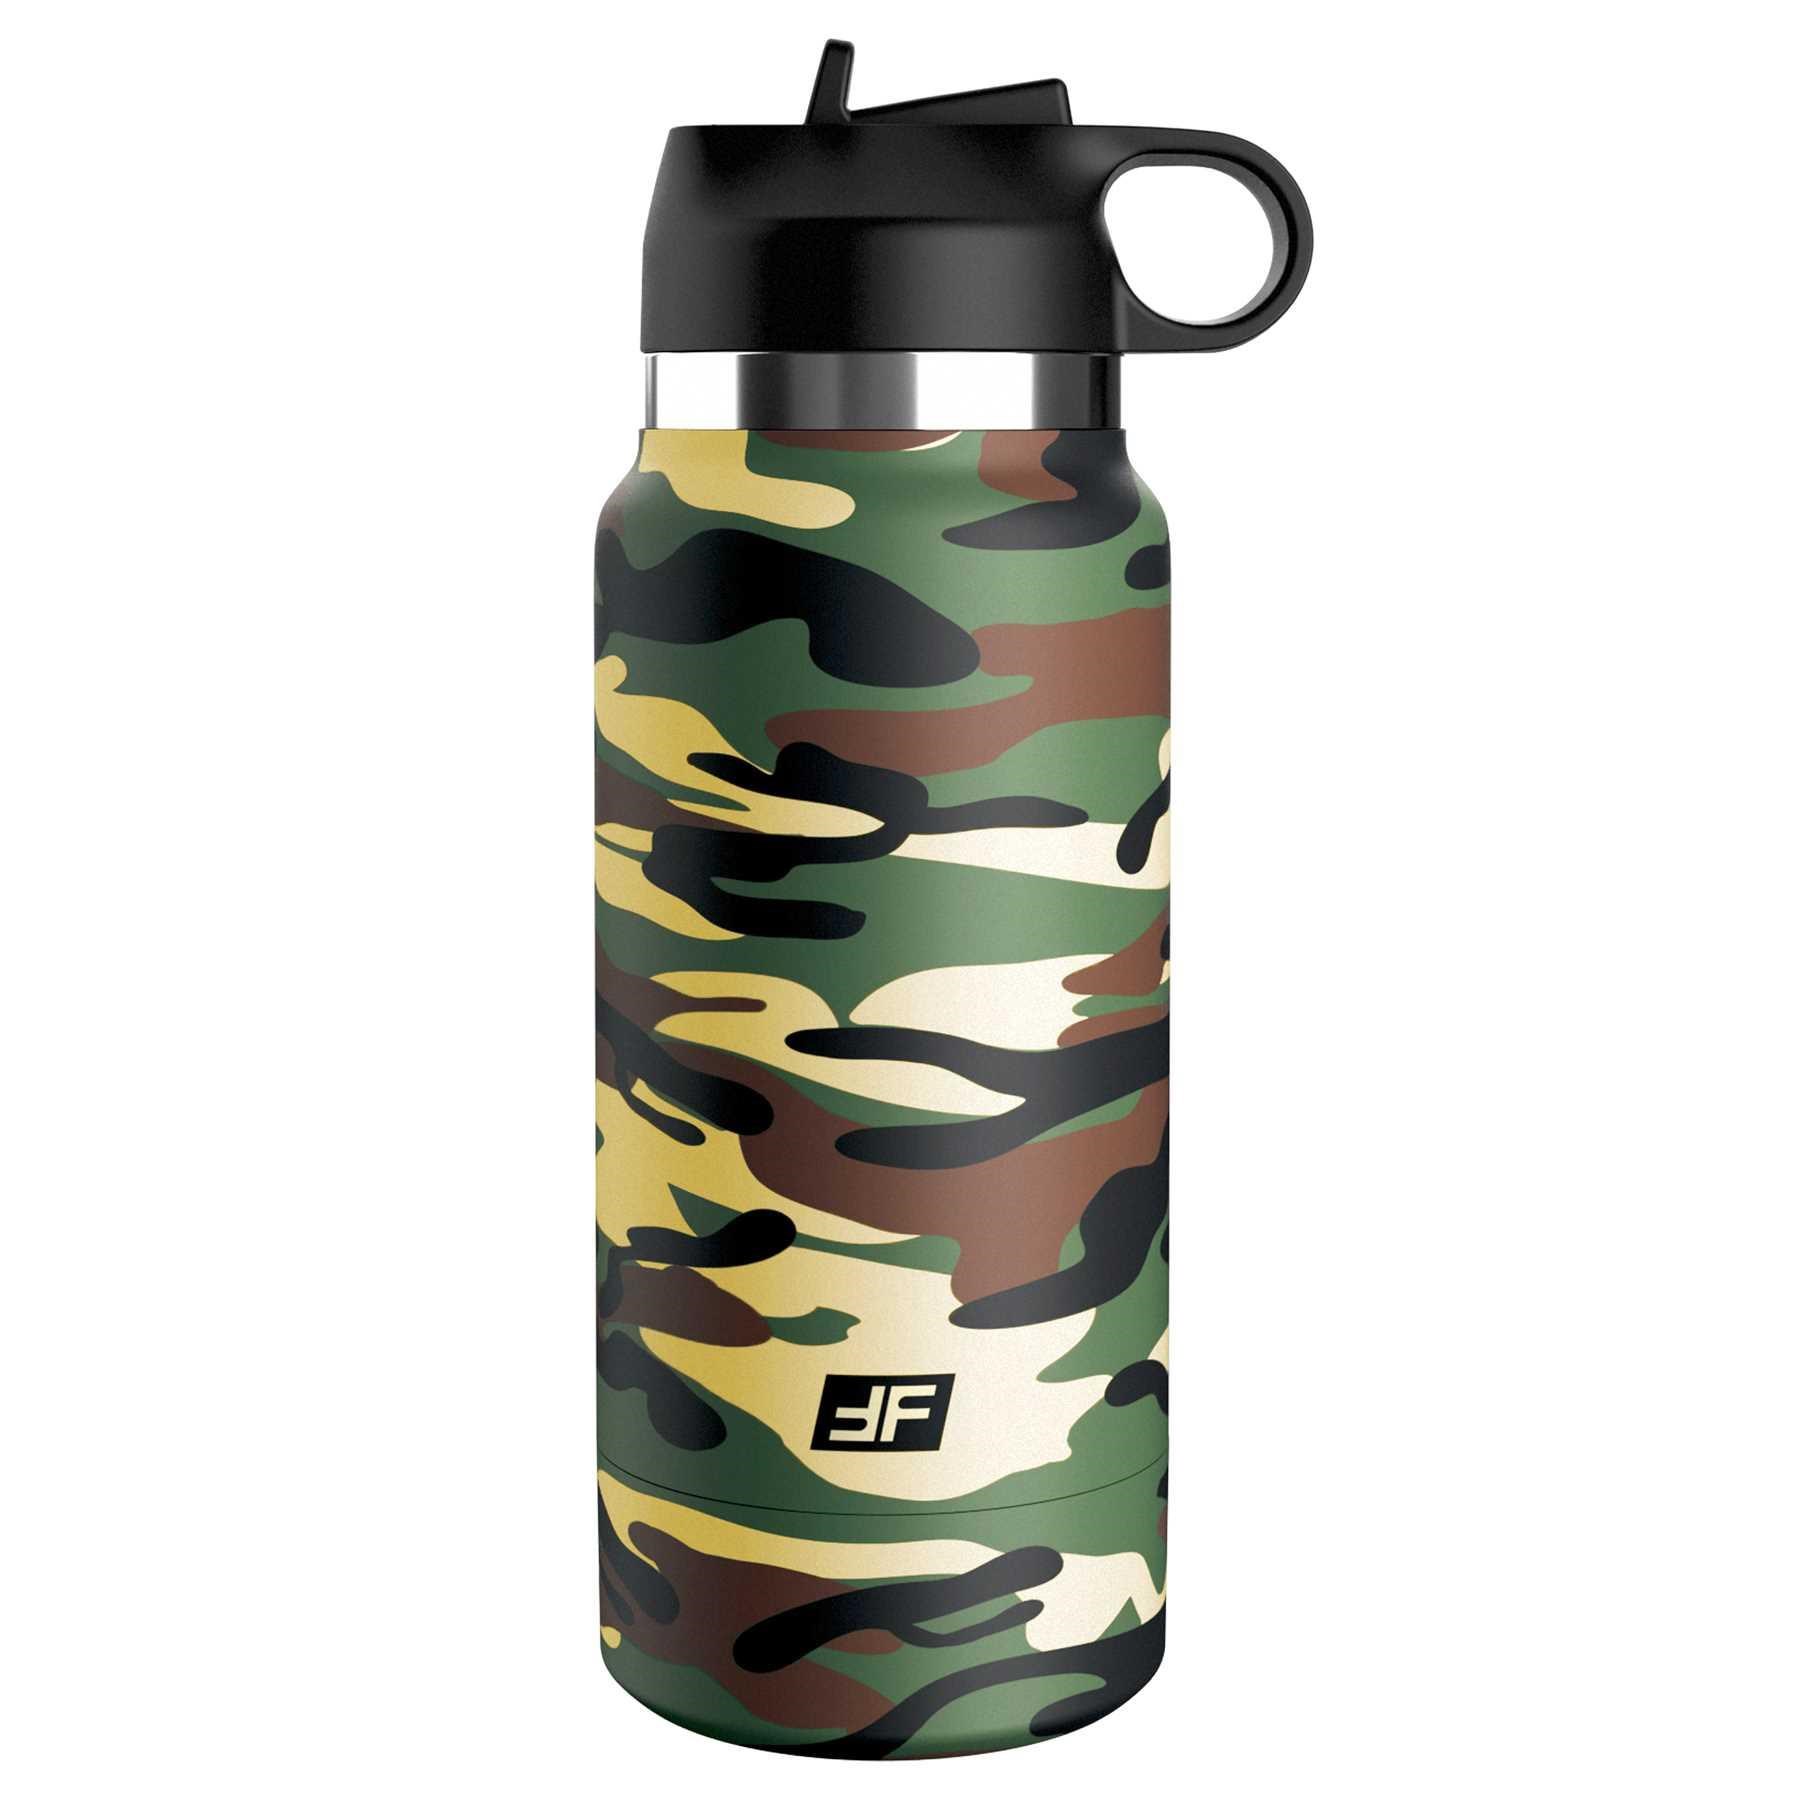 PDX Plus Fap Flask Stroker - Happy Camper with lid on